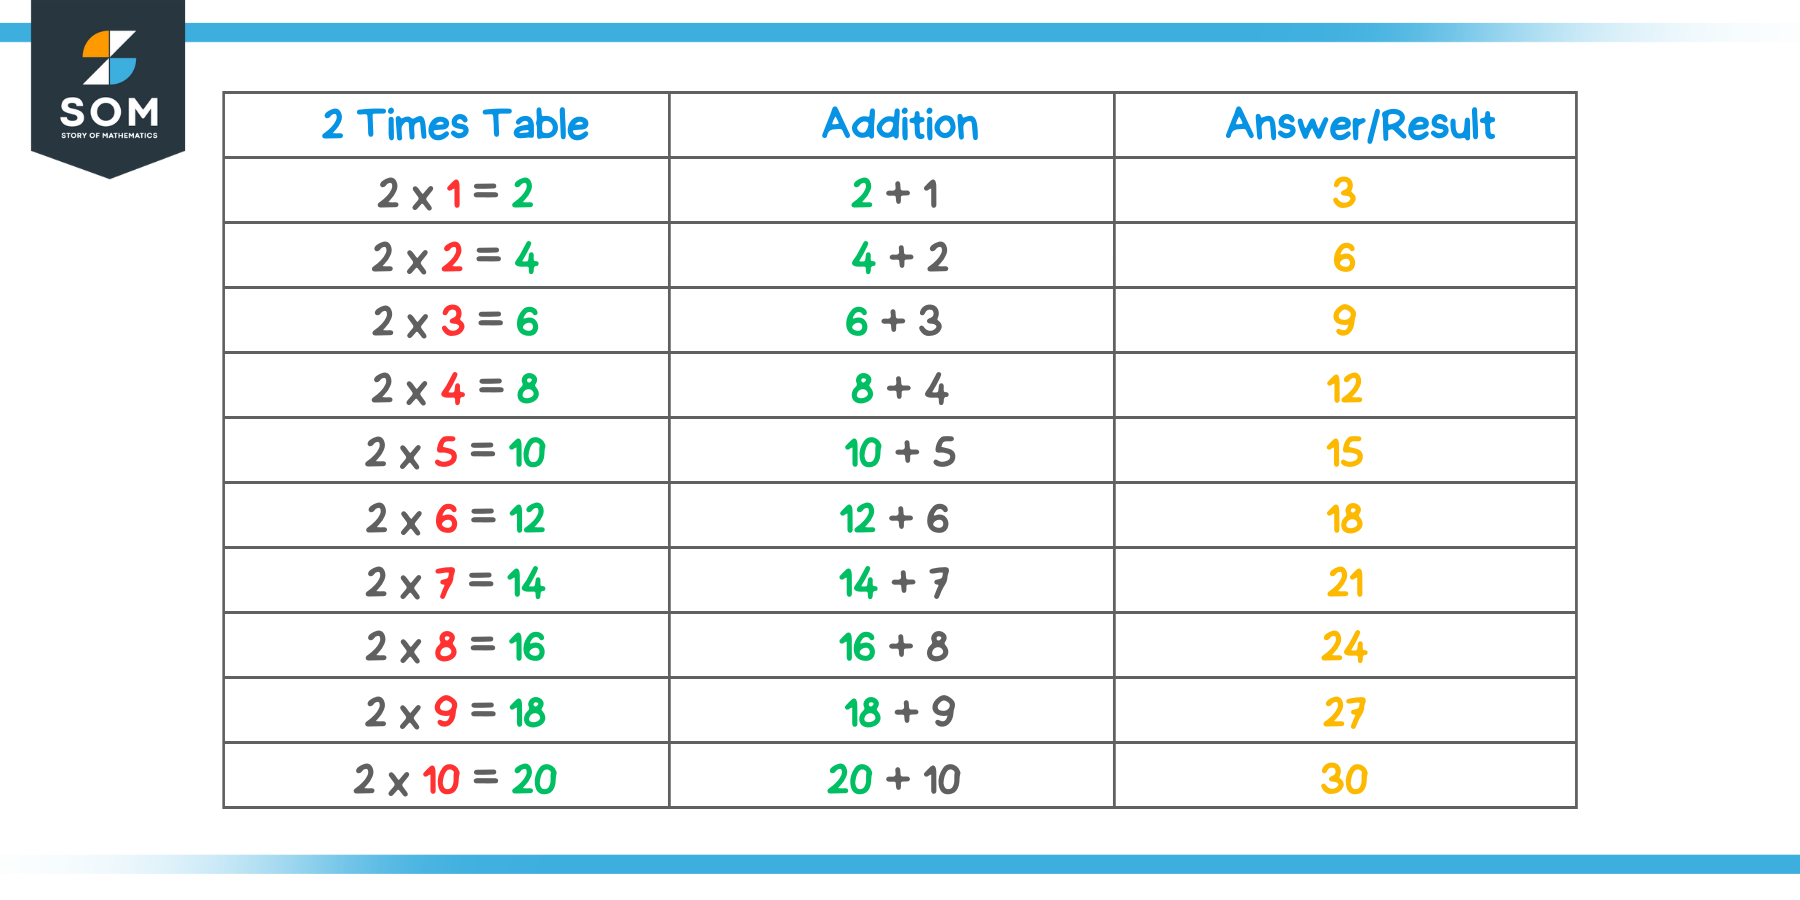 3 Times Table using 2 Times Table